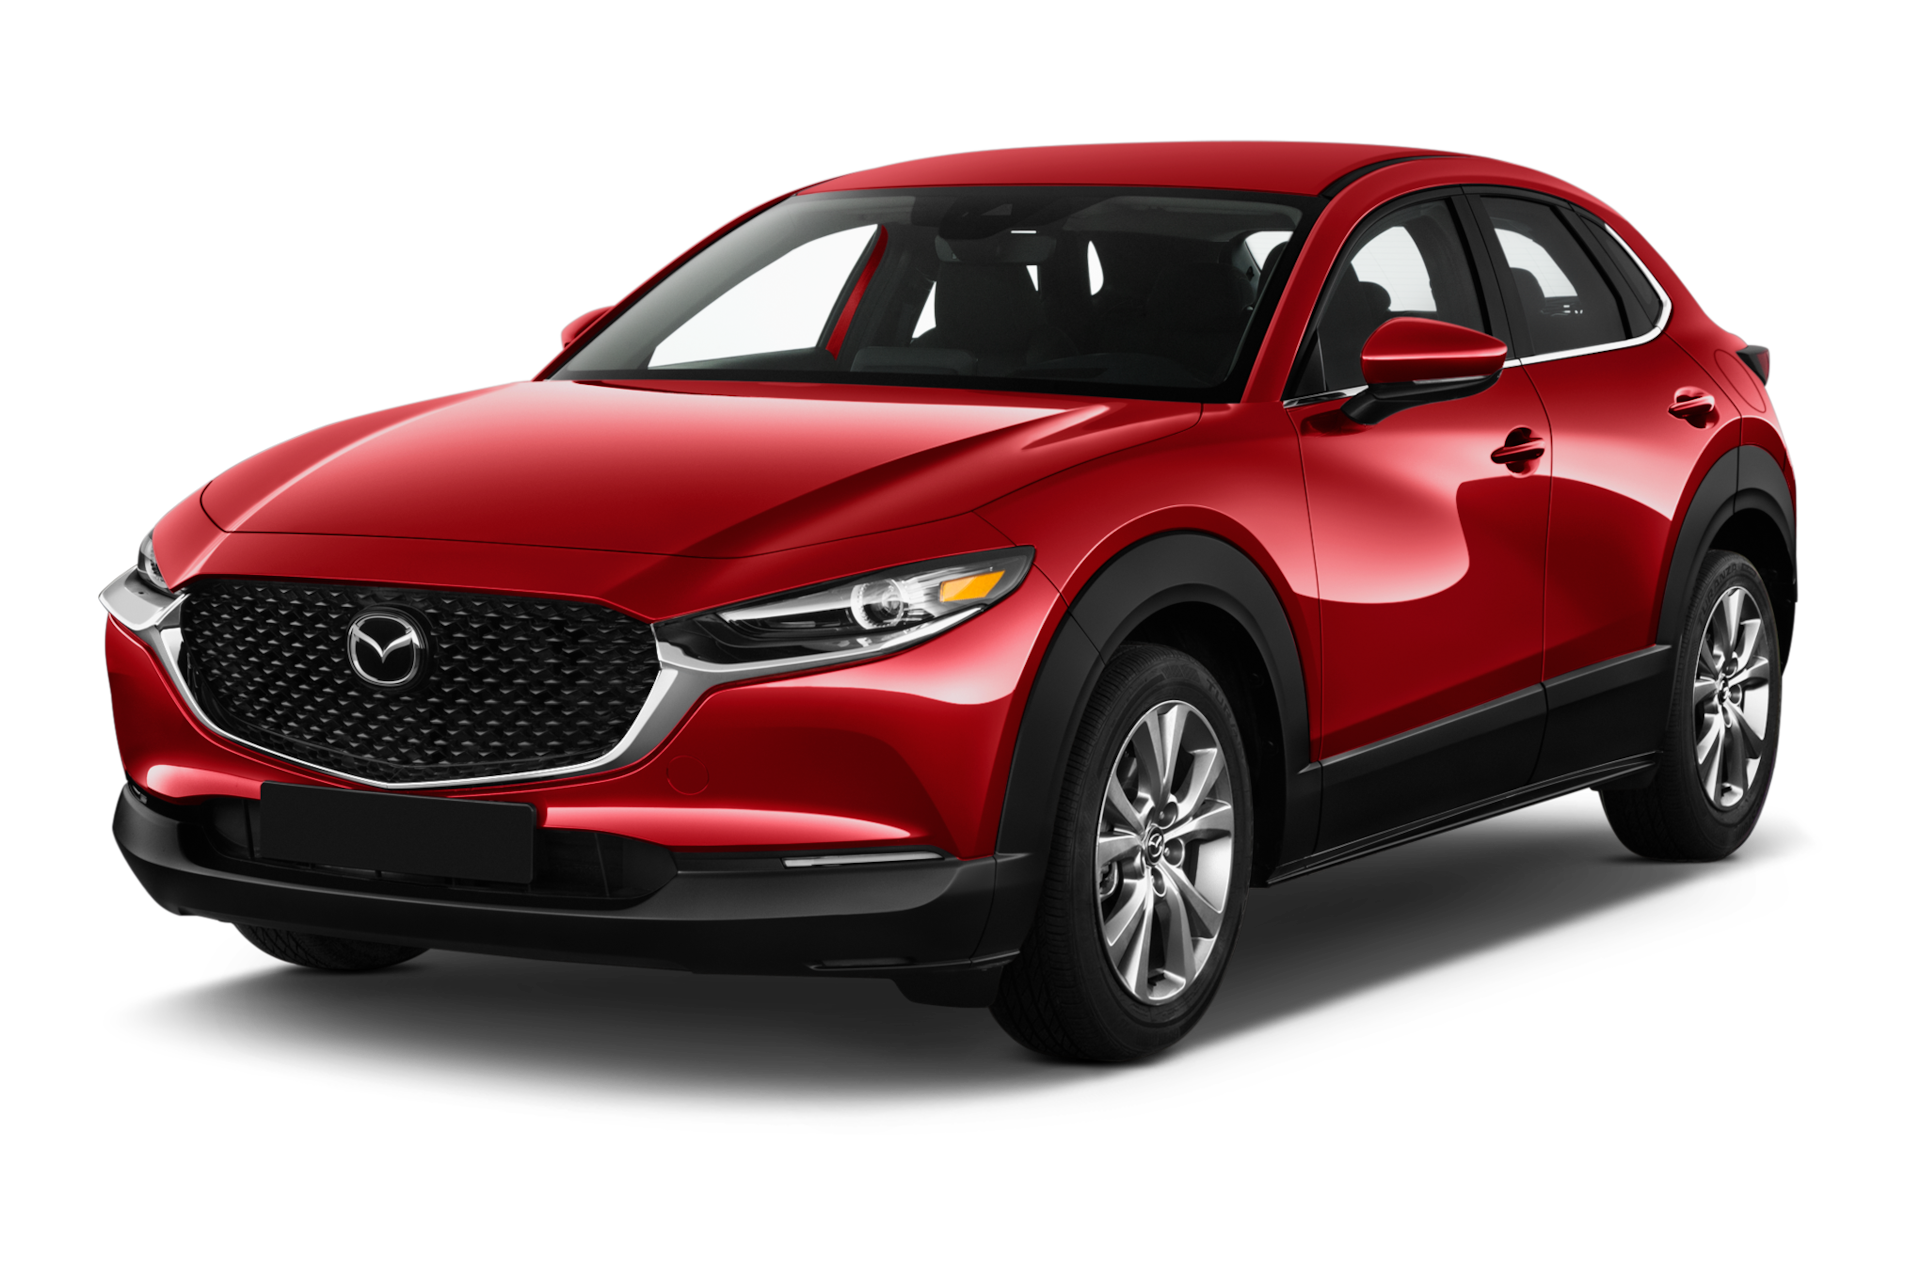 2021 Mazda CX-30 Prices, Reviews, and Photos - MotorTrend